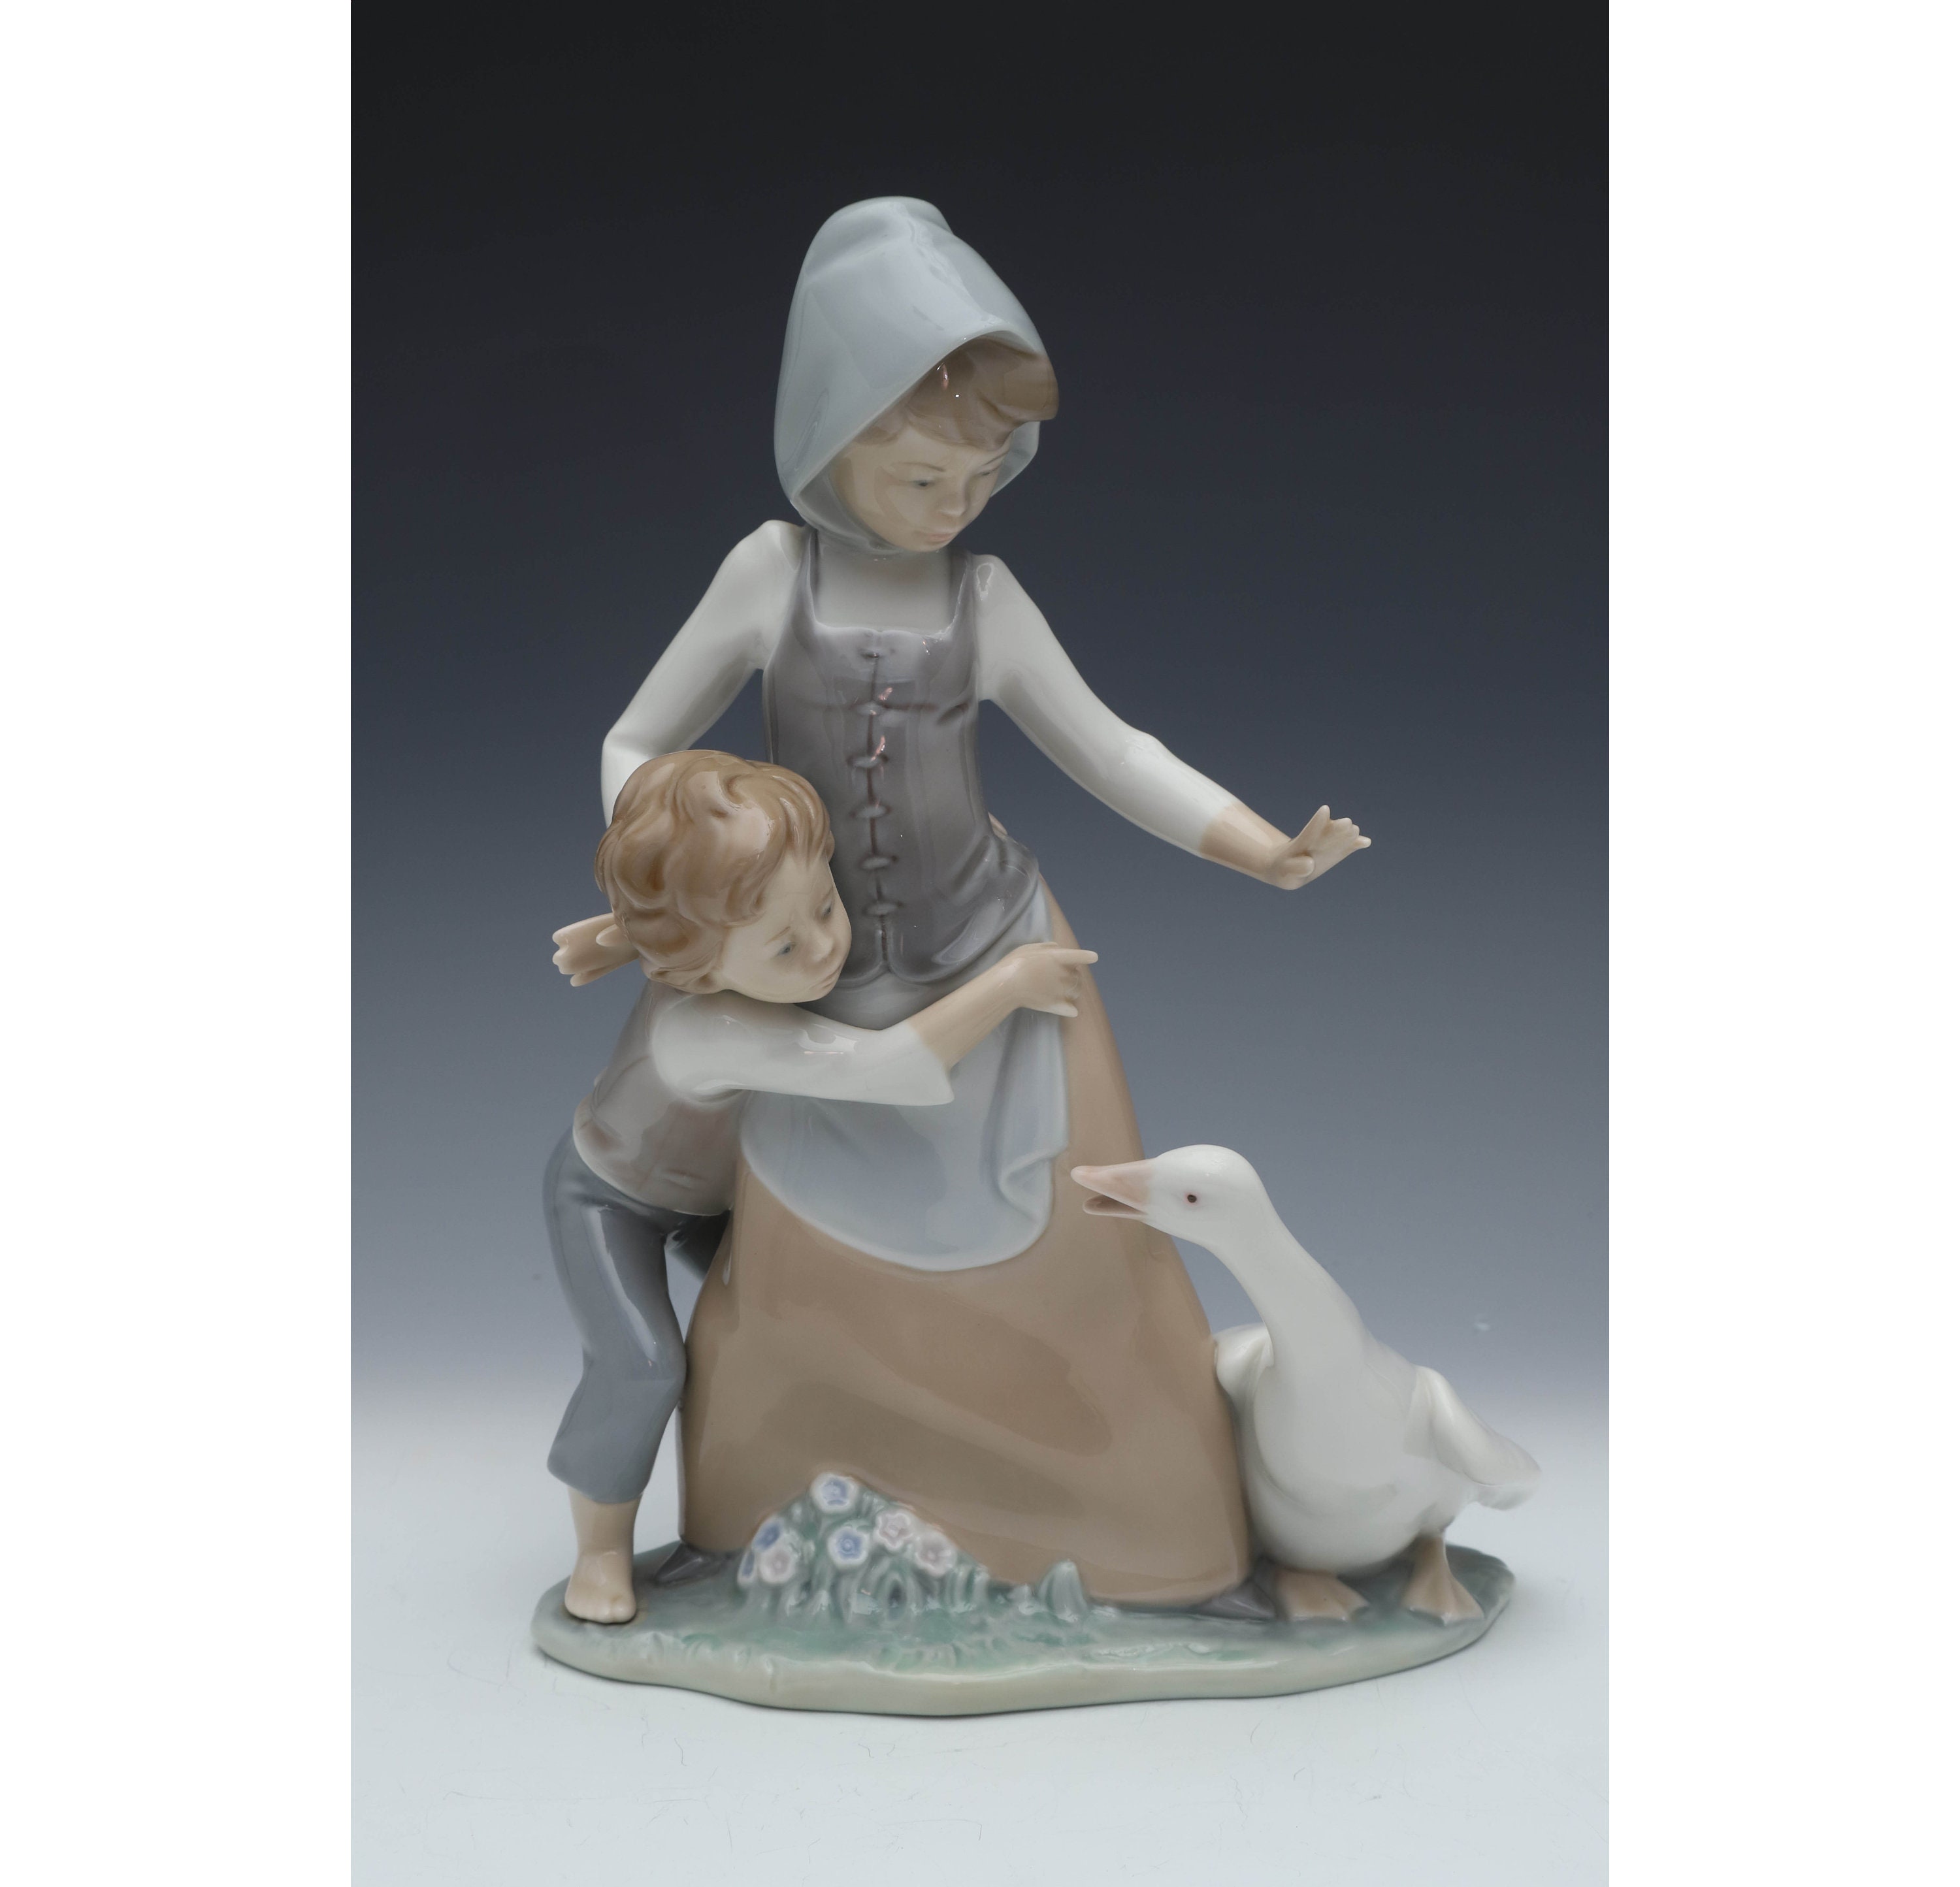 Sold at Auction: Retired Lladro Boy & Girl Porcelain Figurine 2173